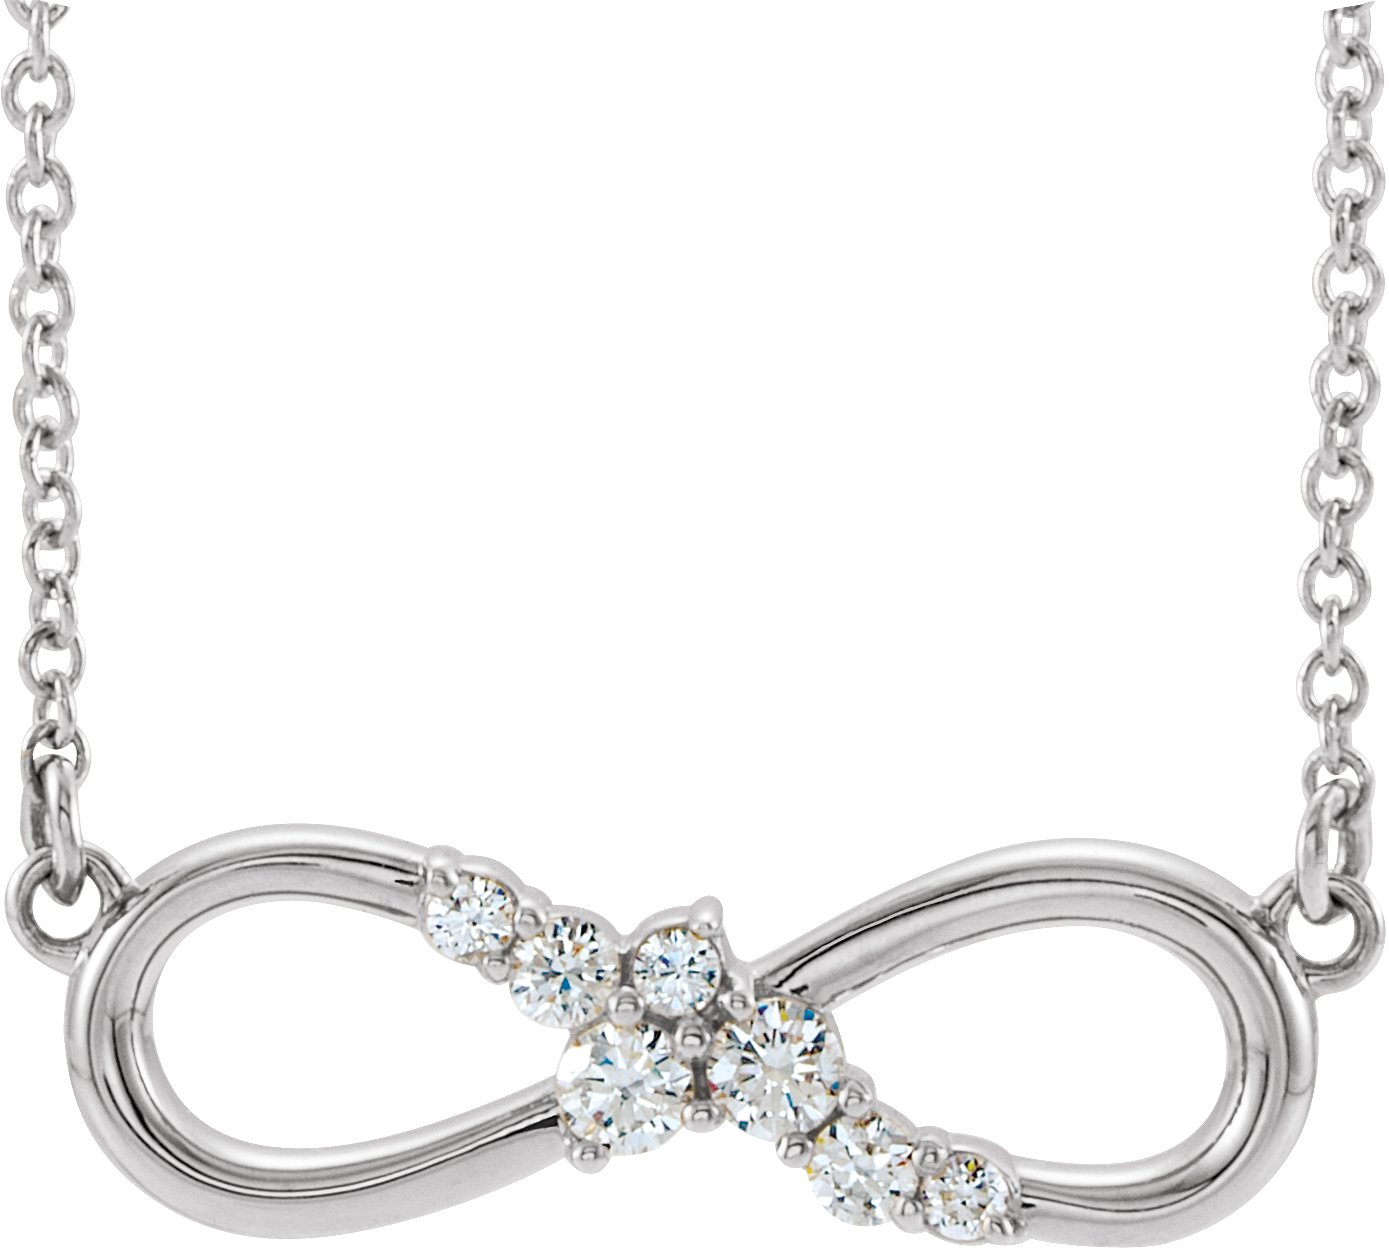 Sterling Silver .125 CTW Diamond Infinity Inspired Bar 16 inch Necklace Ref. 14735140